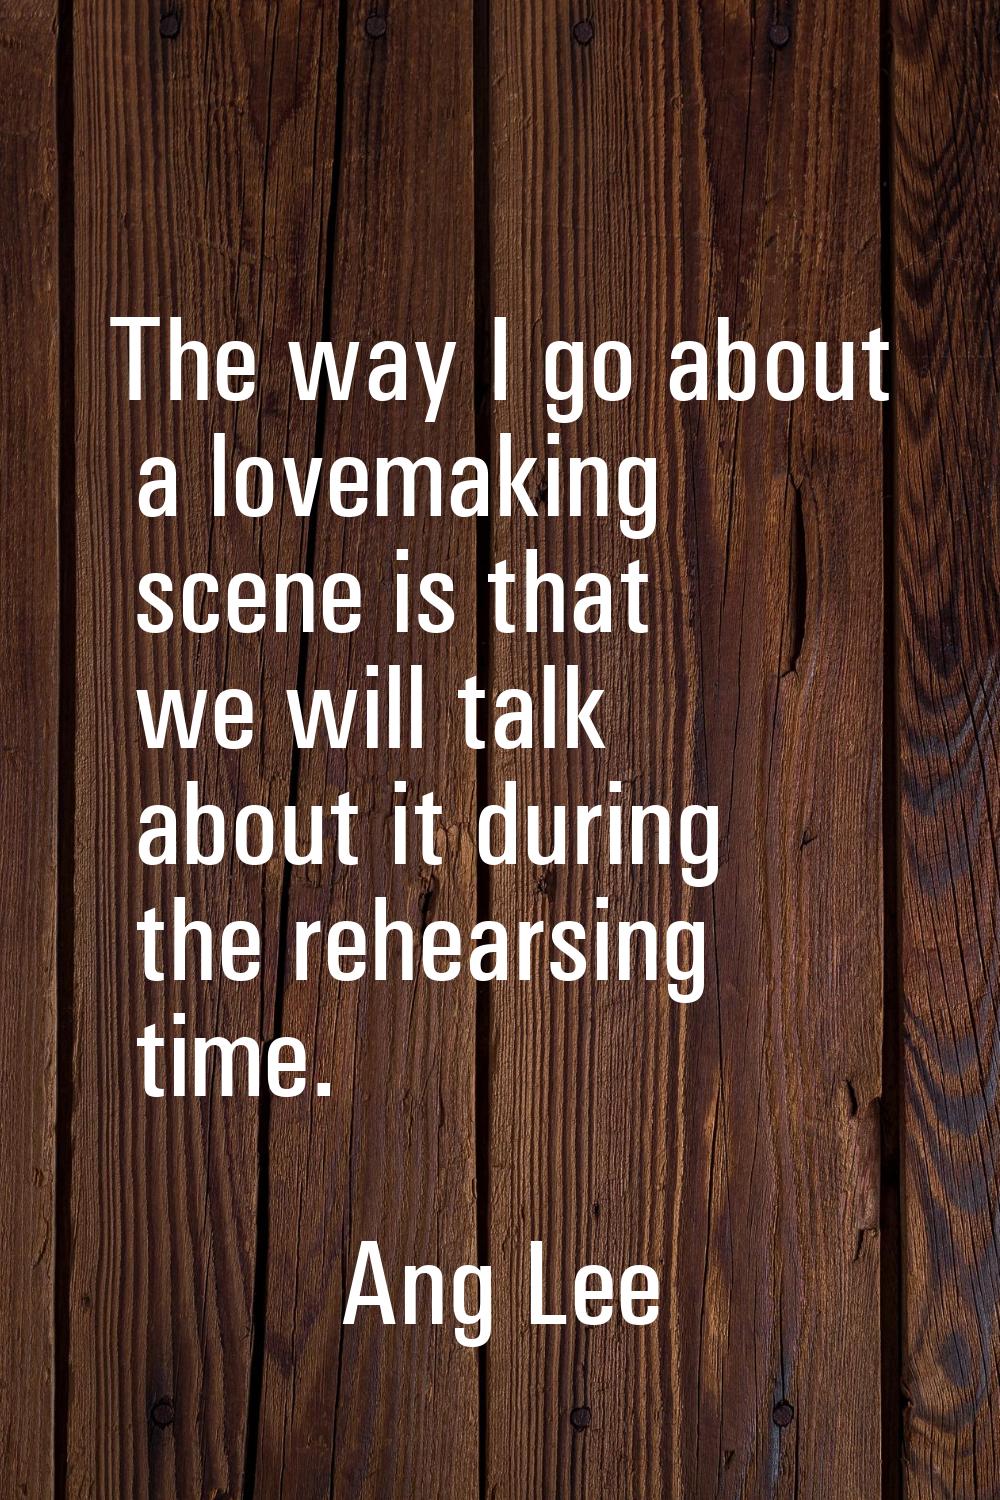 The way I go about a lovemaking scene is that we will talk about it during the rehearsing time.